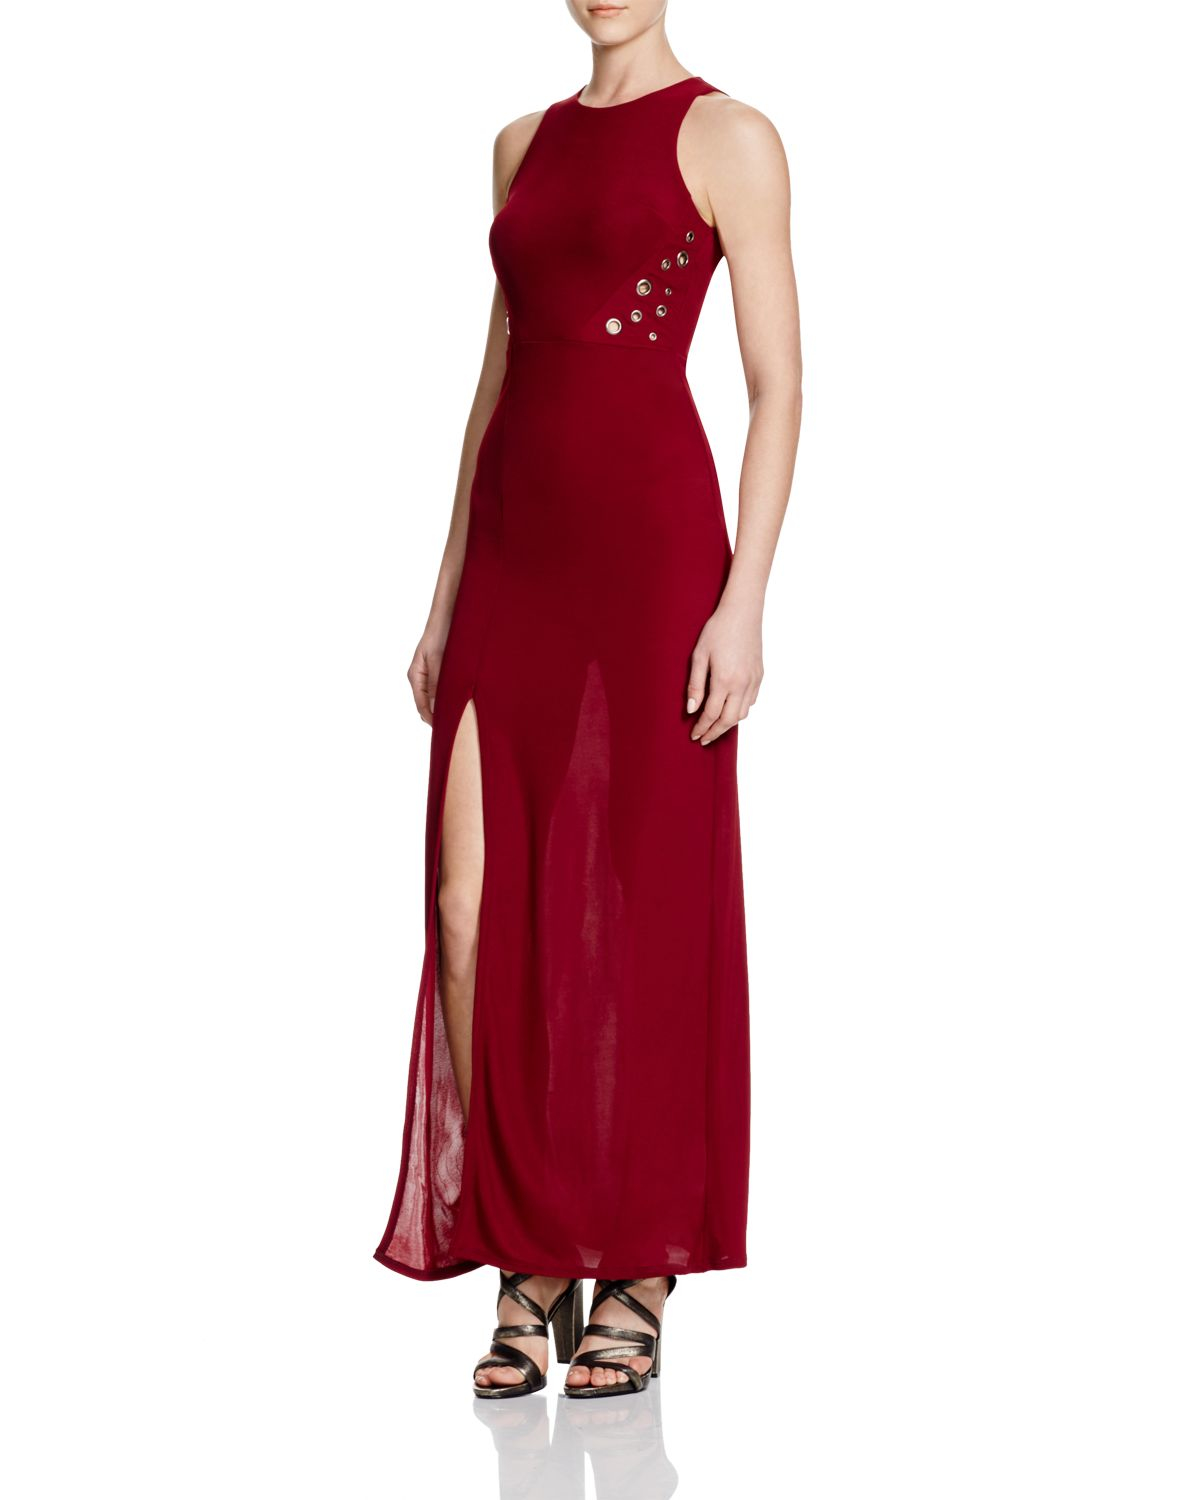 Aqua Jersey Maxi Dress - Bloomingdale's Exclusive in Red (Burgundy) | Lyst